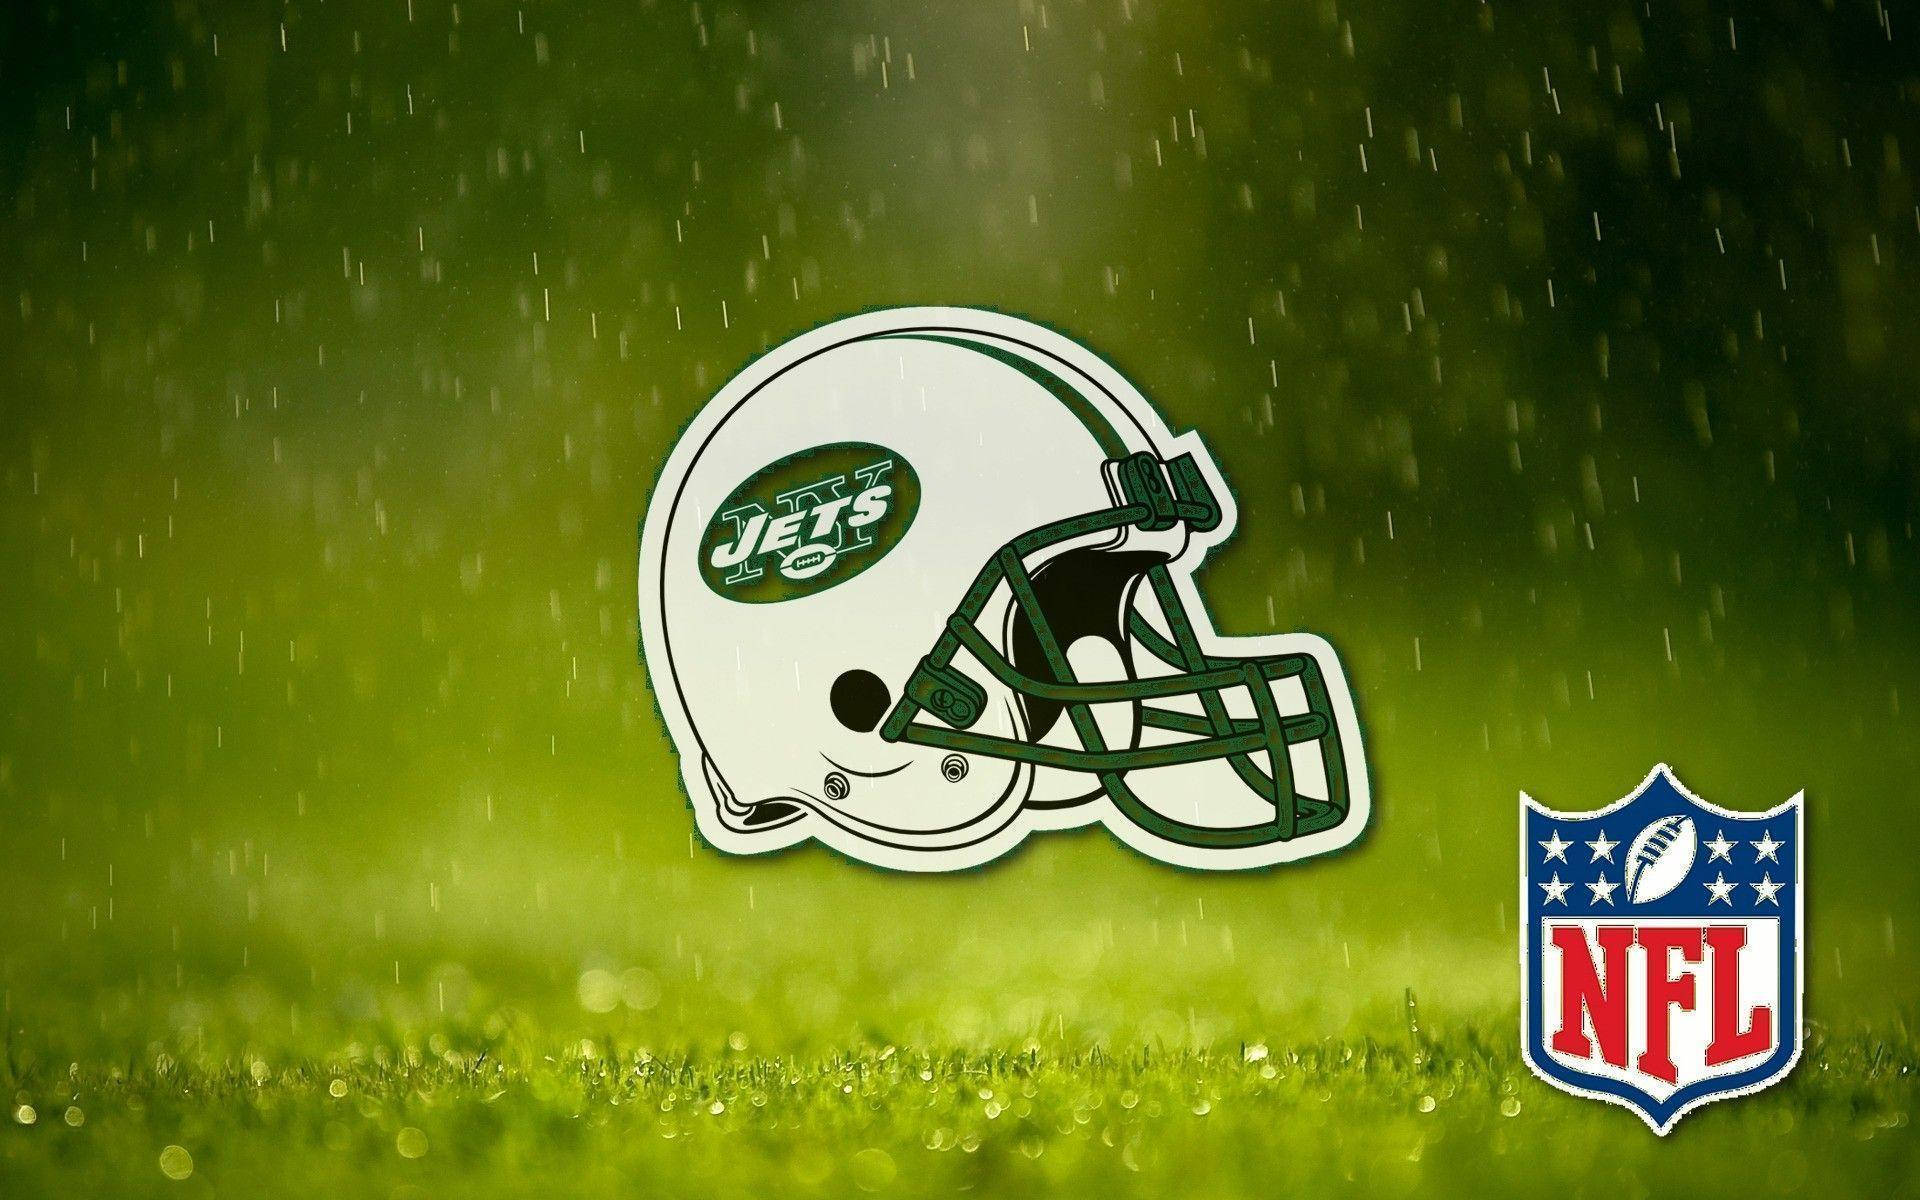 New York Jets Wallpapers  Top 30 Best New York Jets Wallpapers Download